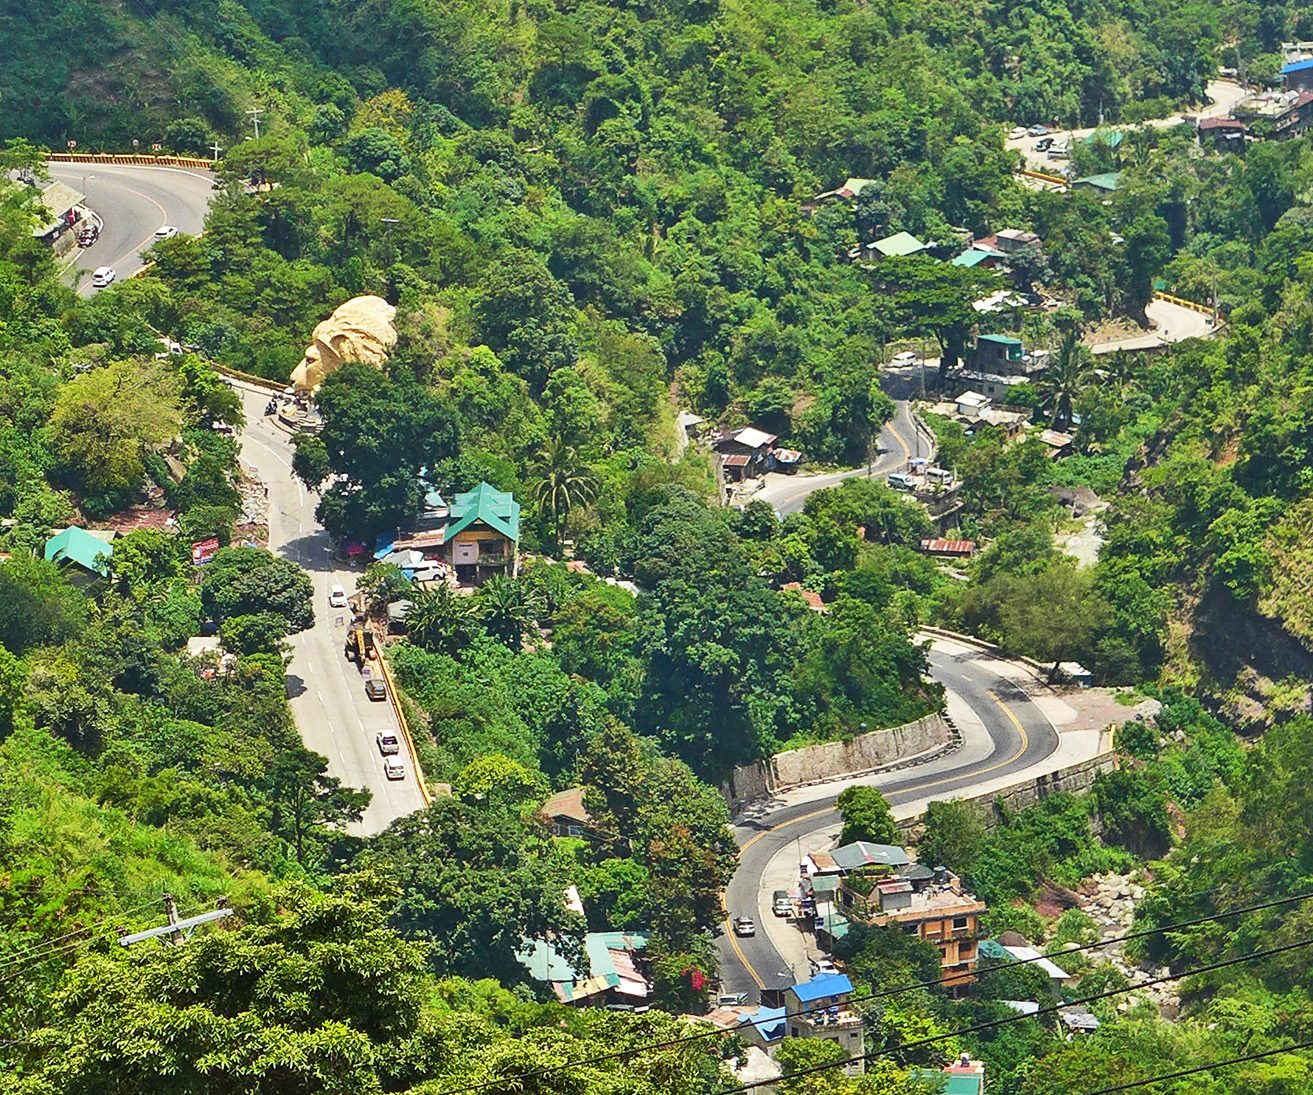 Kennon Road temporarily reopened for test run this weekend